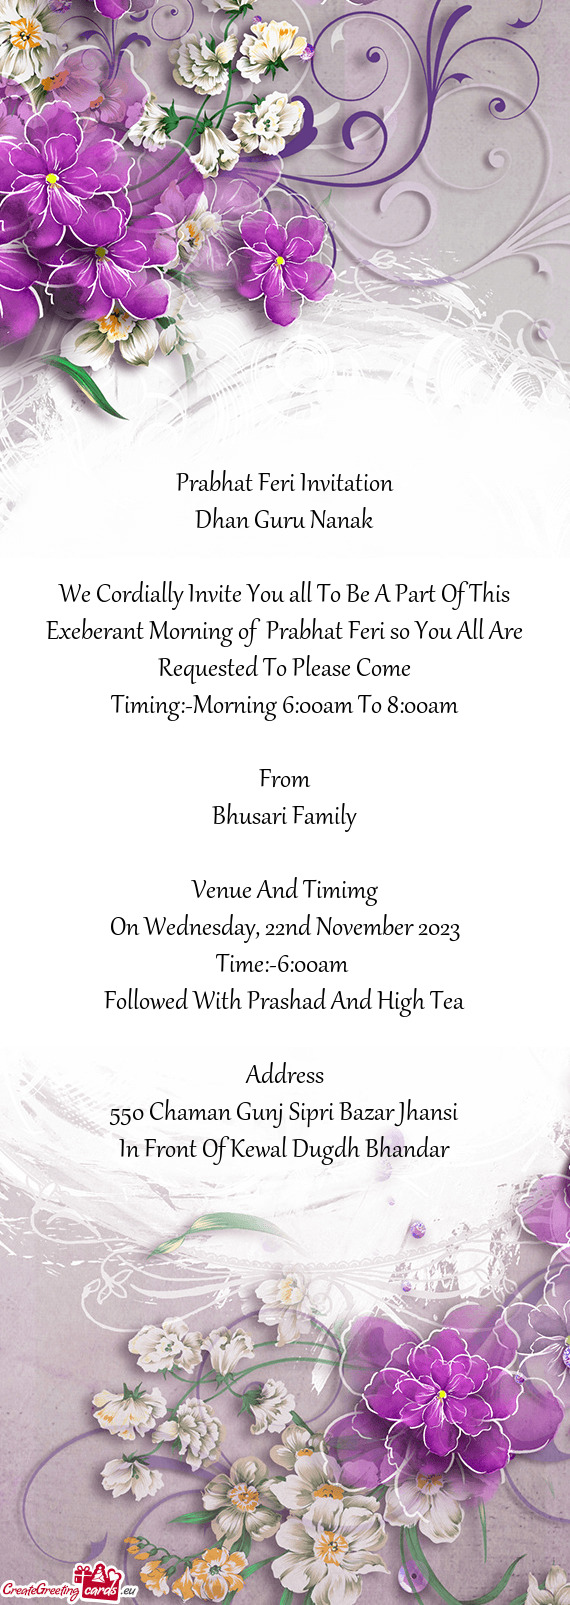 We Cordially Invite You all To Be A Part Of This Exeberant Morning of Prabhat Feri so You All Are R